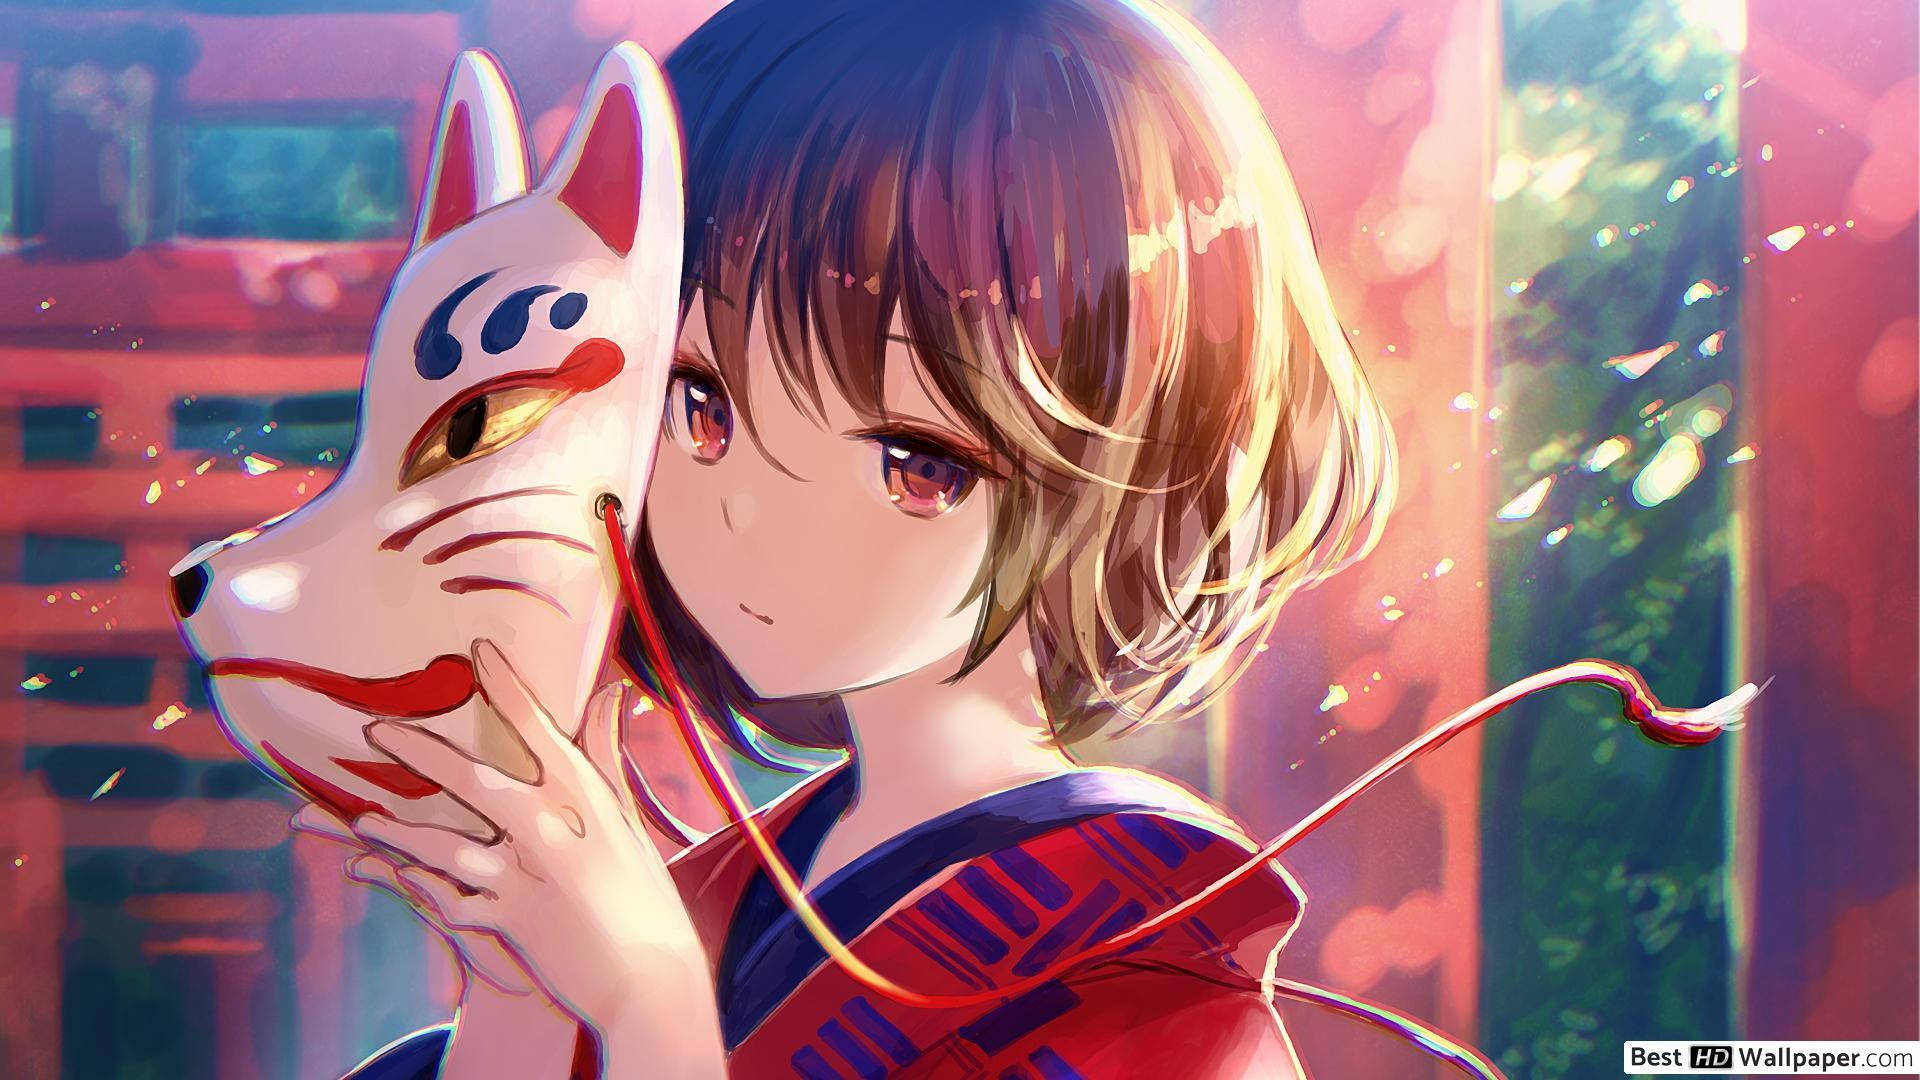 A Girl Holding A Koi Cat In Her Hands Wallpaper